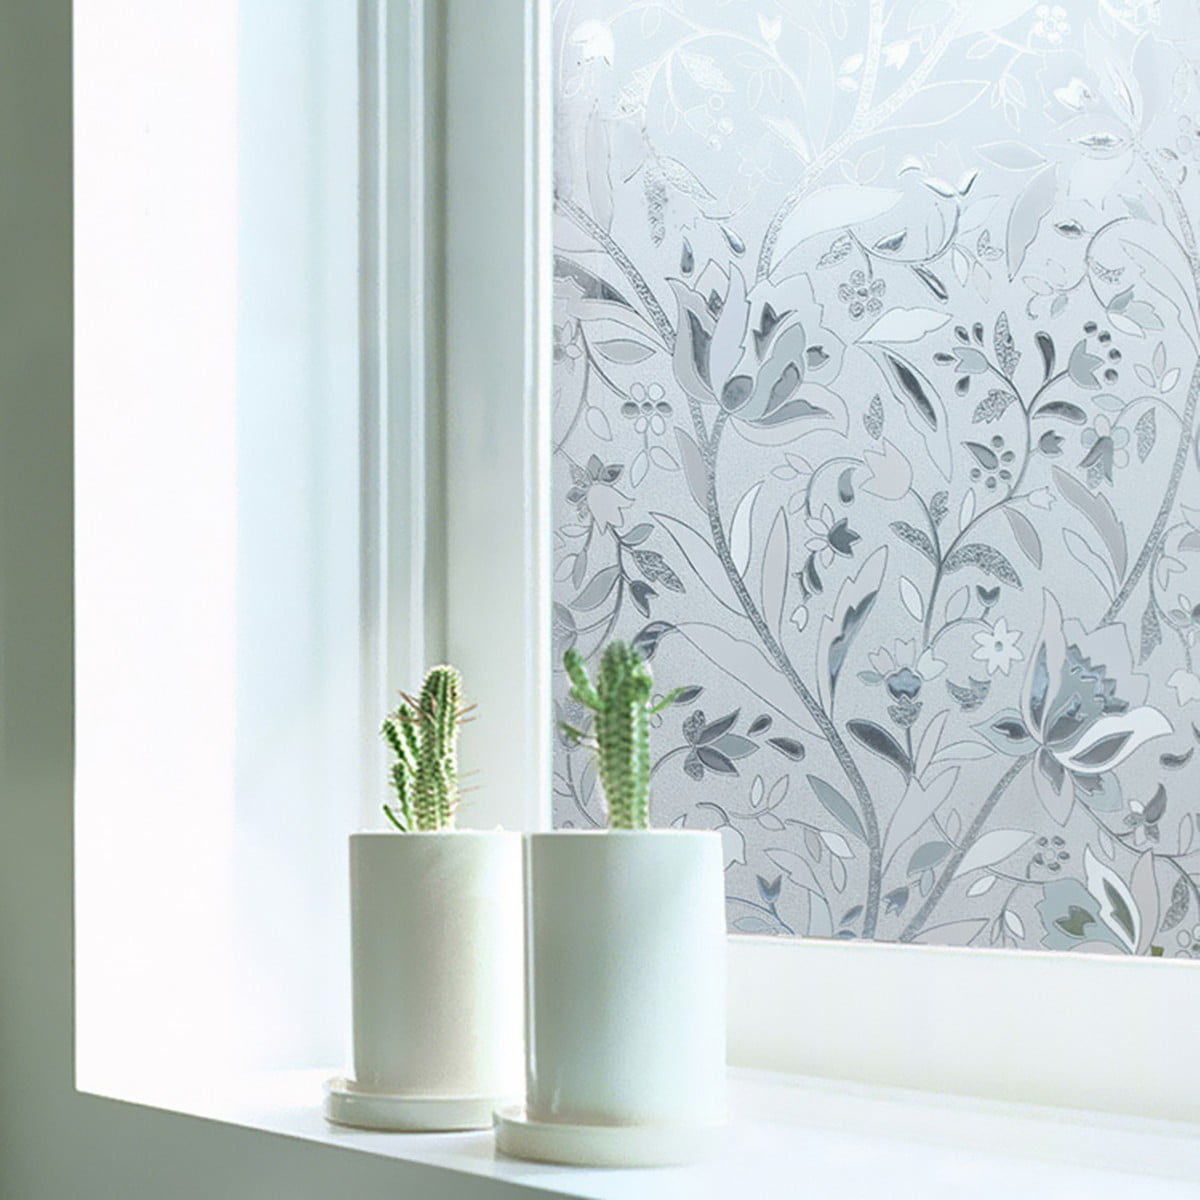 PVC Cling Window Film Sticker Glass Paper Frosted Privacy Vinyl Cover Home Decor